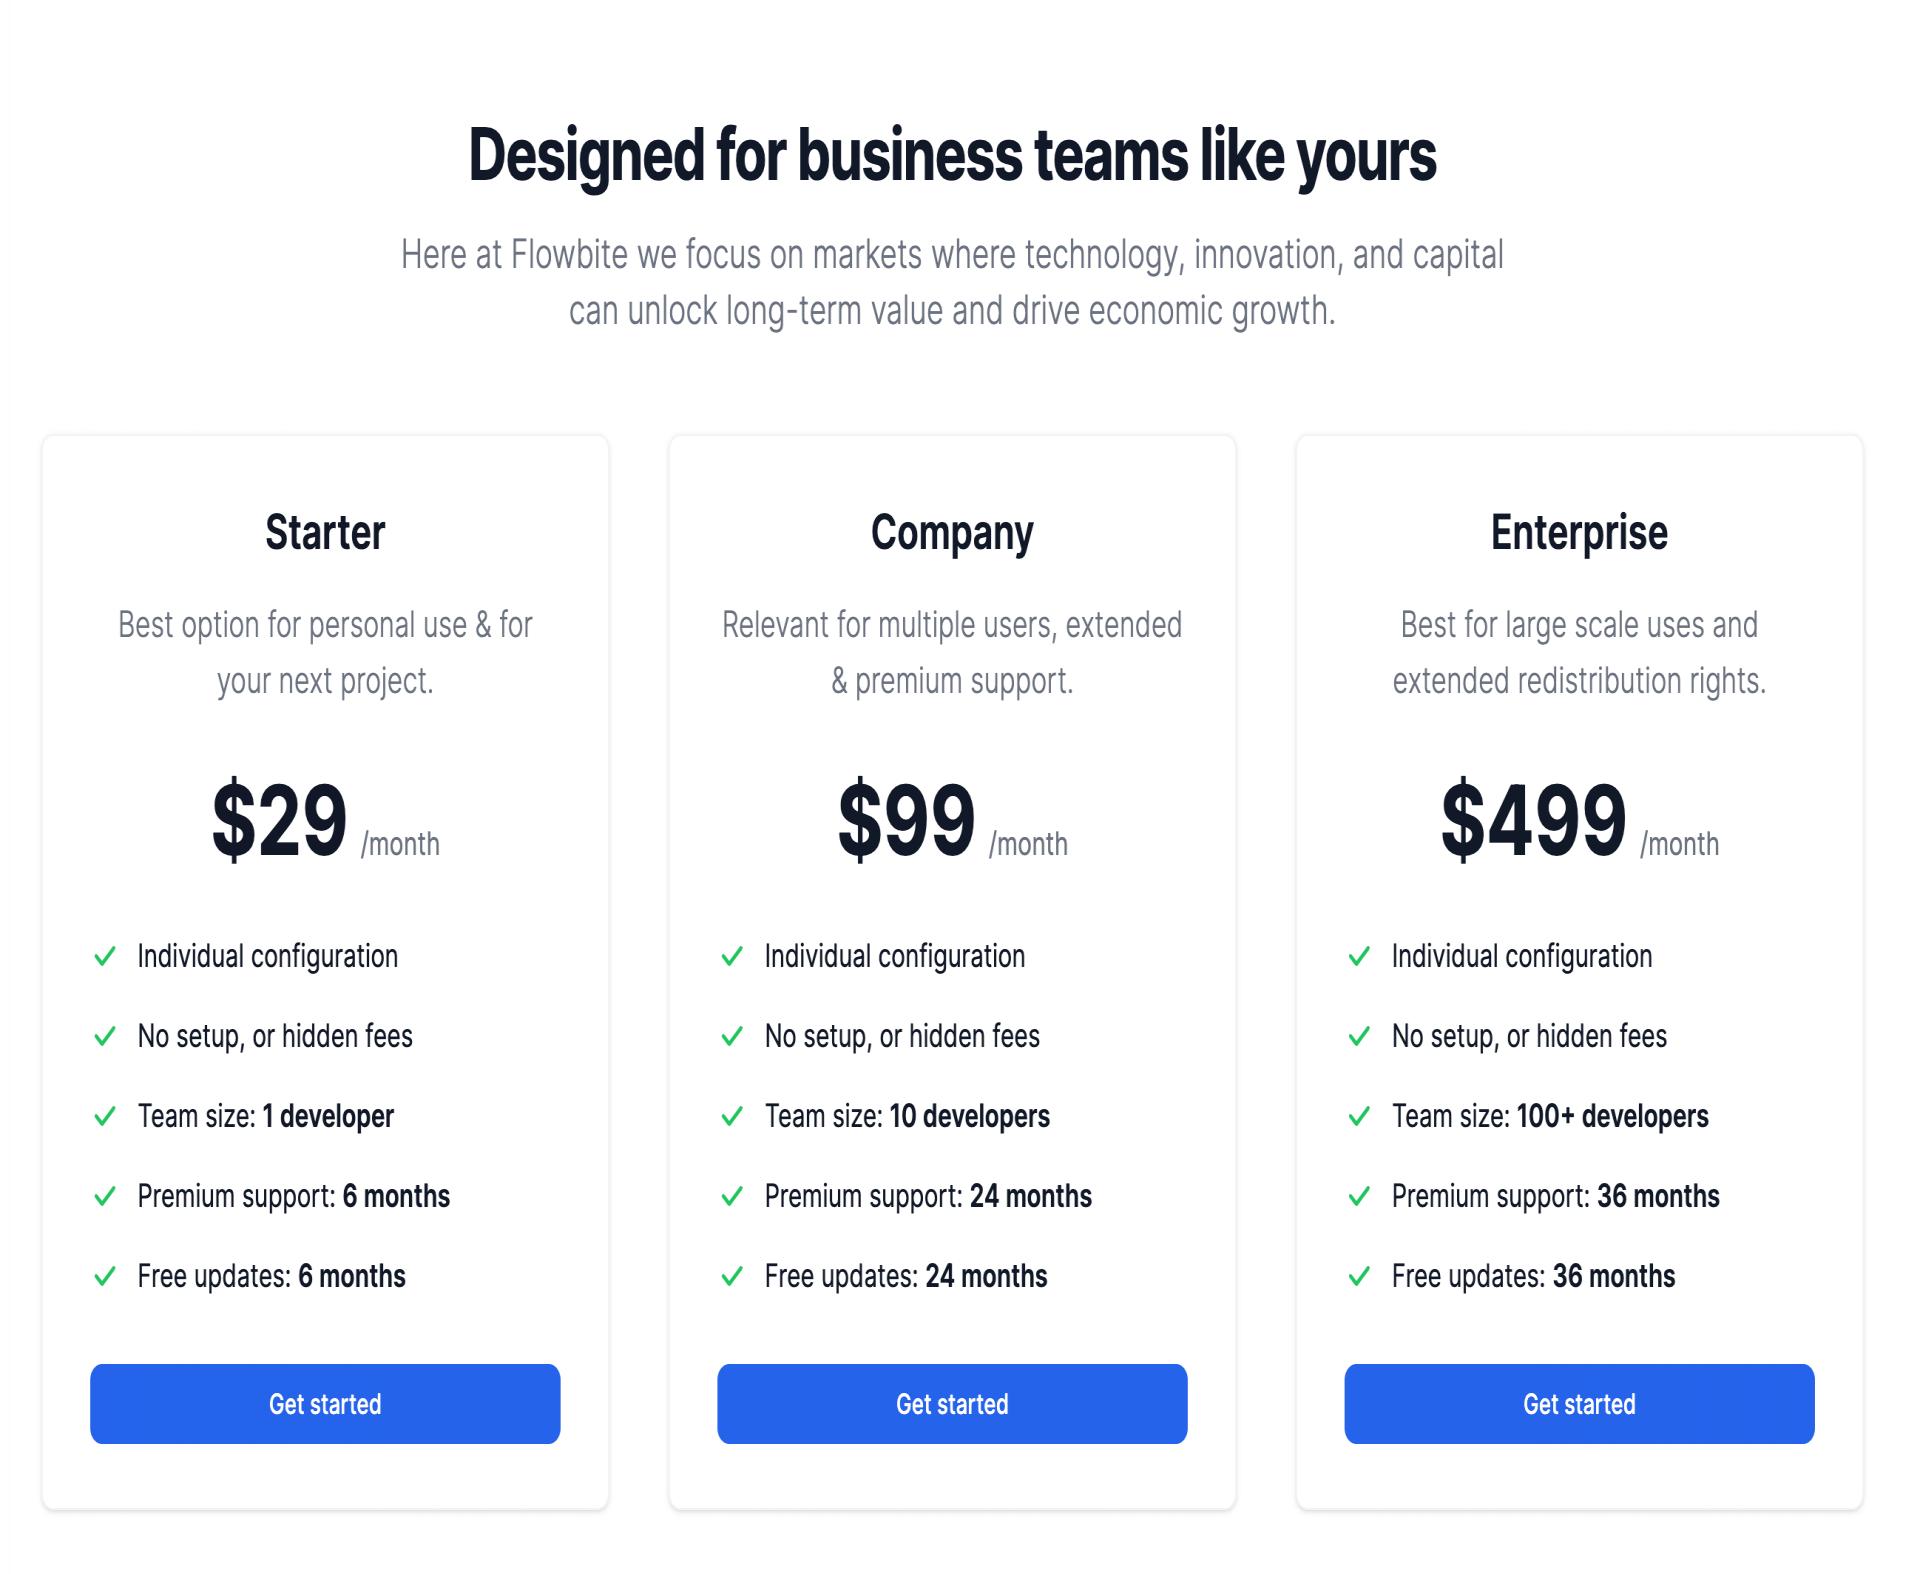 How to build a pricing table with Tailwind CSS and Flowbite